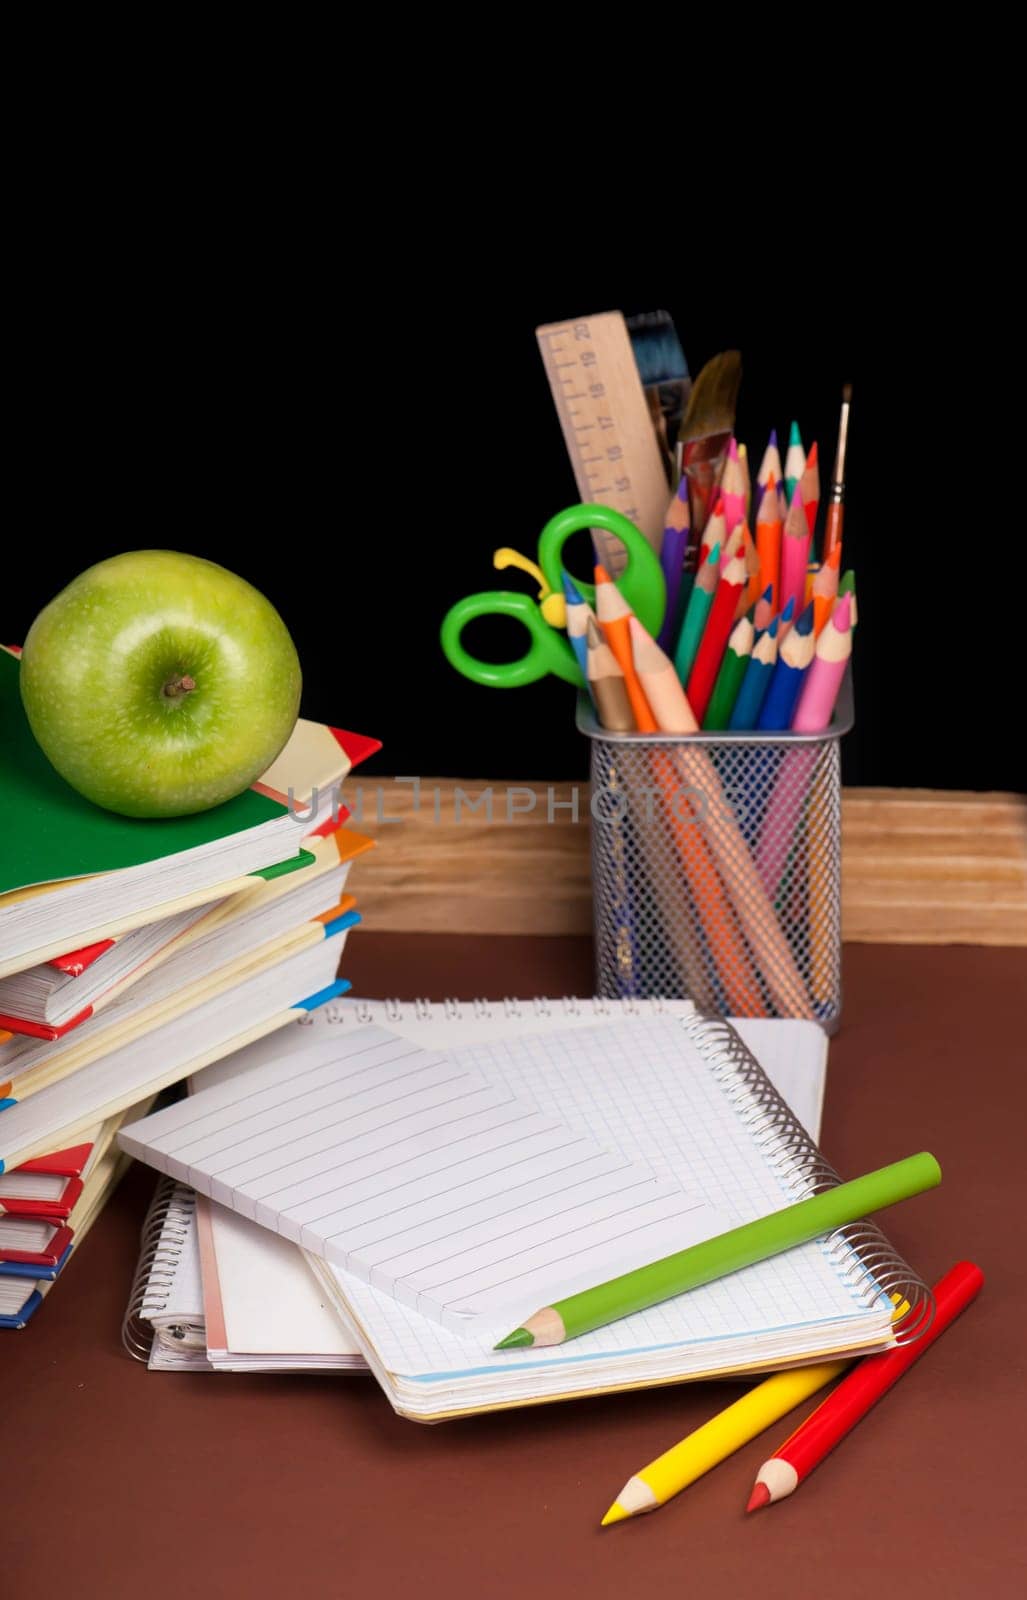 board, books, pencils, opened empty notebook against a dark background